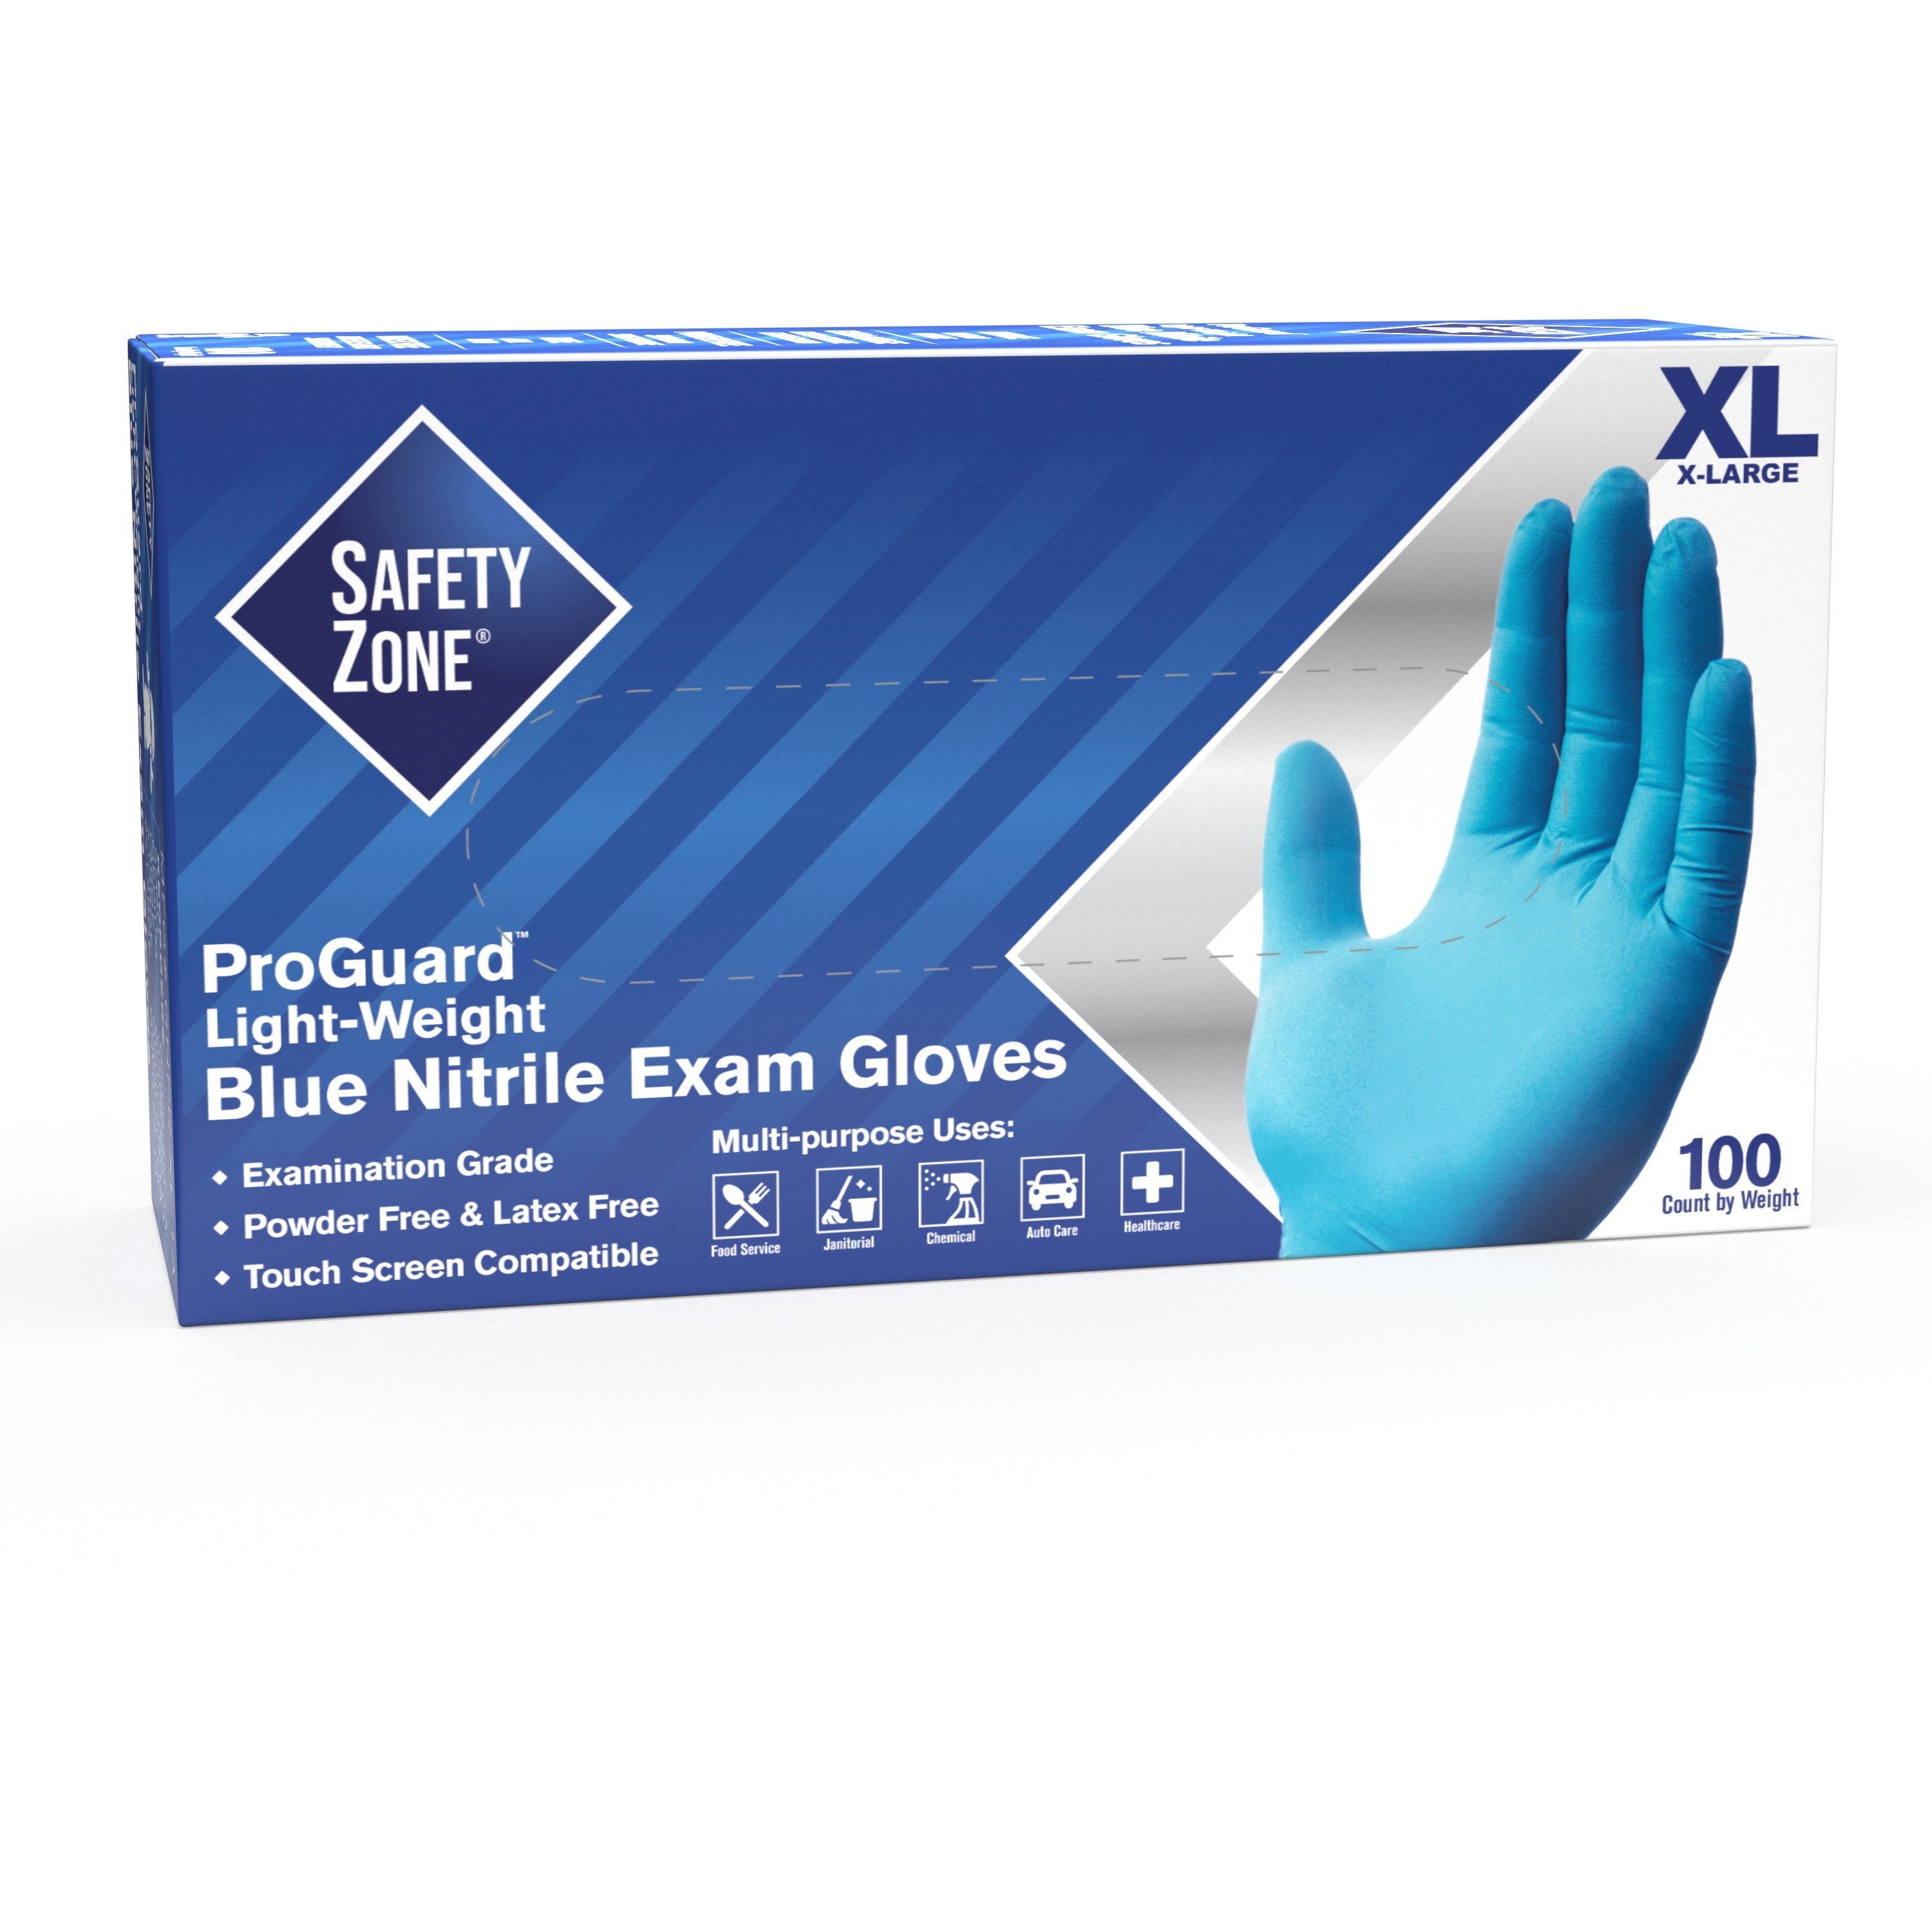 Safety Zone Powder Free Blue Nitrile Gloves - X-Large Size - Indigo - Comfortable, Allergen-free, Silicone-free, Latex-free, Textured - For Cleaning, Dishwashing, Food, Janitorial Use, Painting, Pet Care - 100 / Box - 3 mil Thickness - 9.65" Glove Le